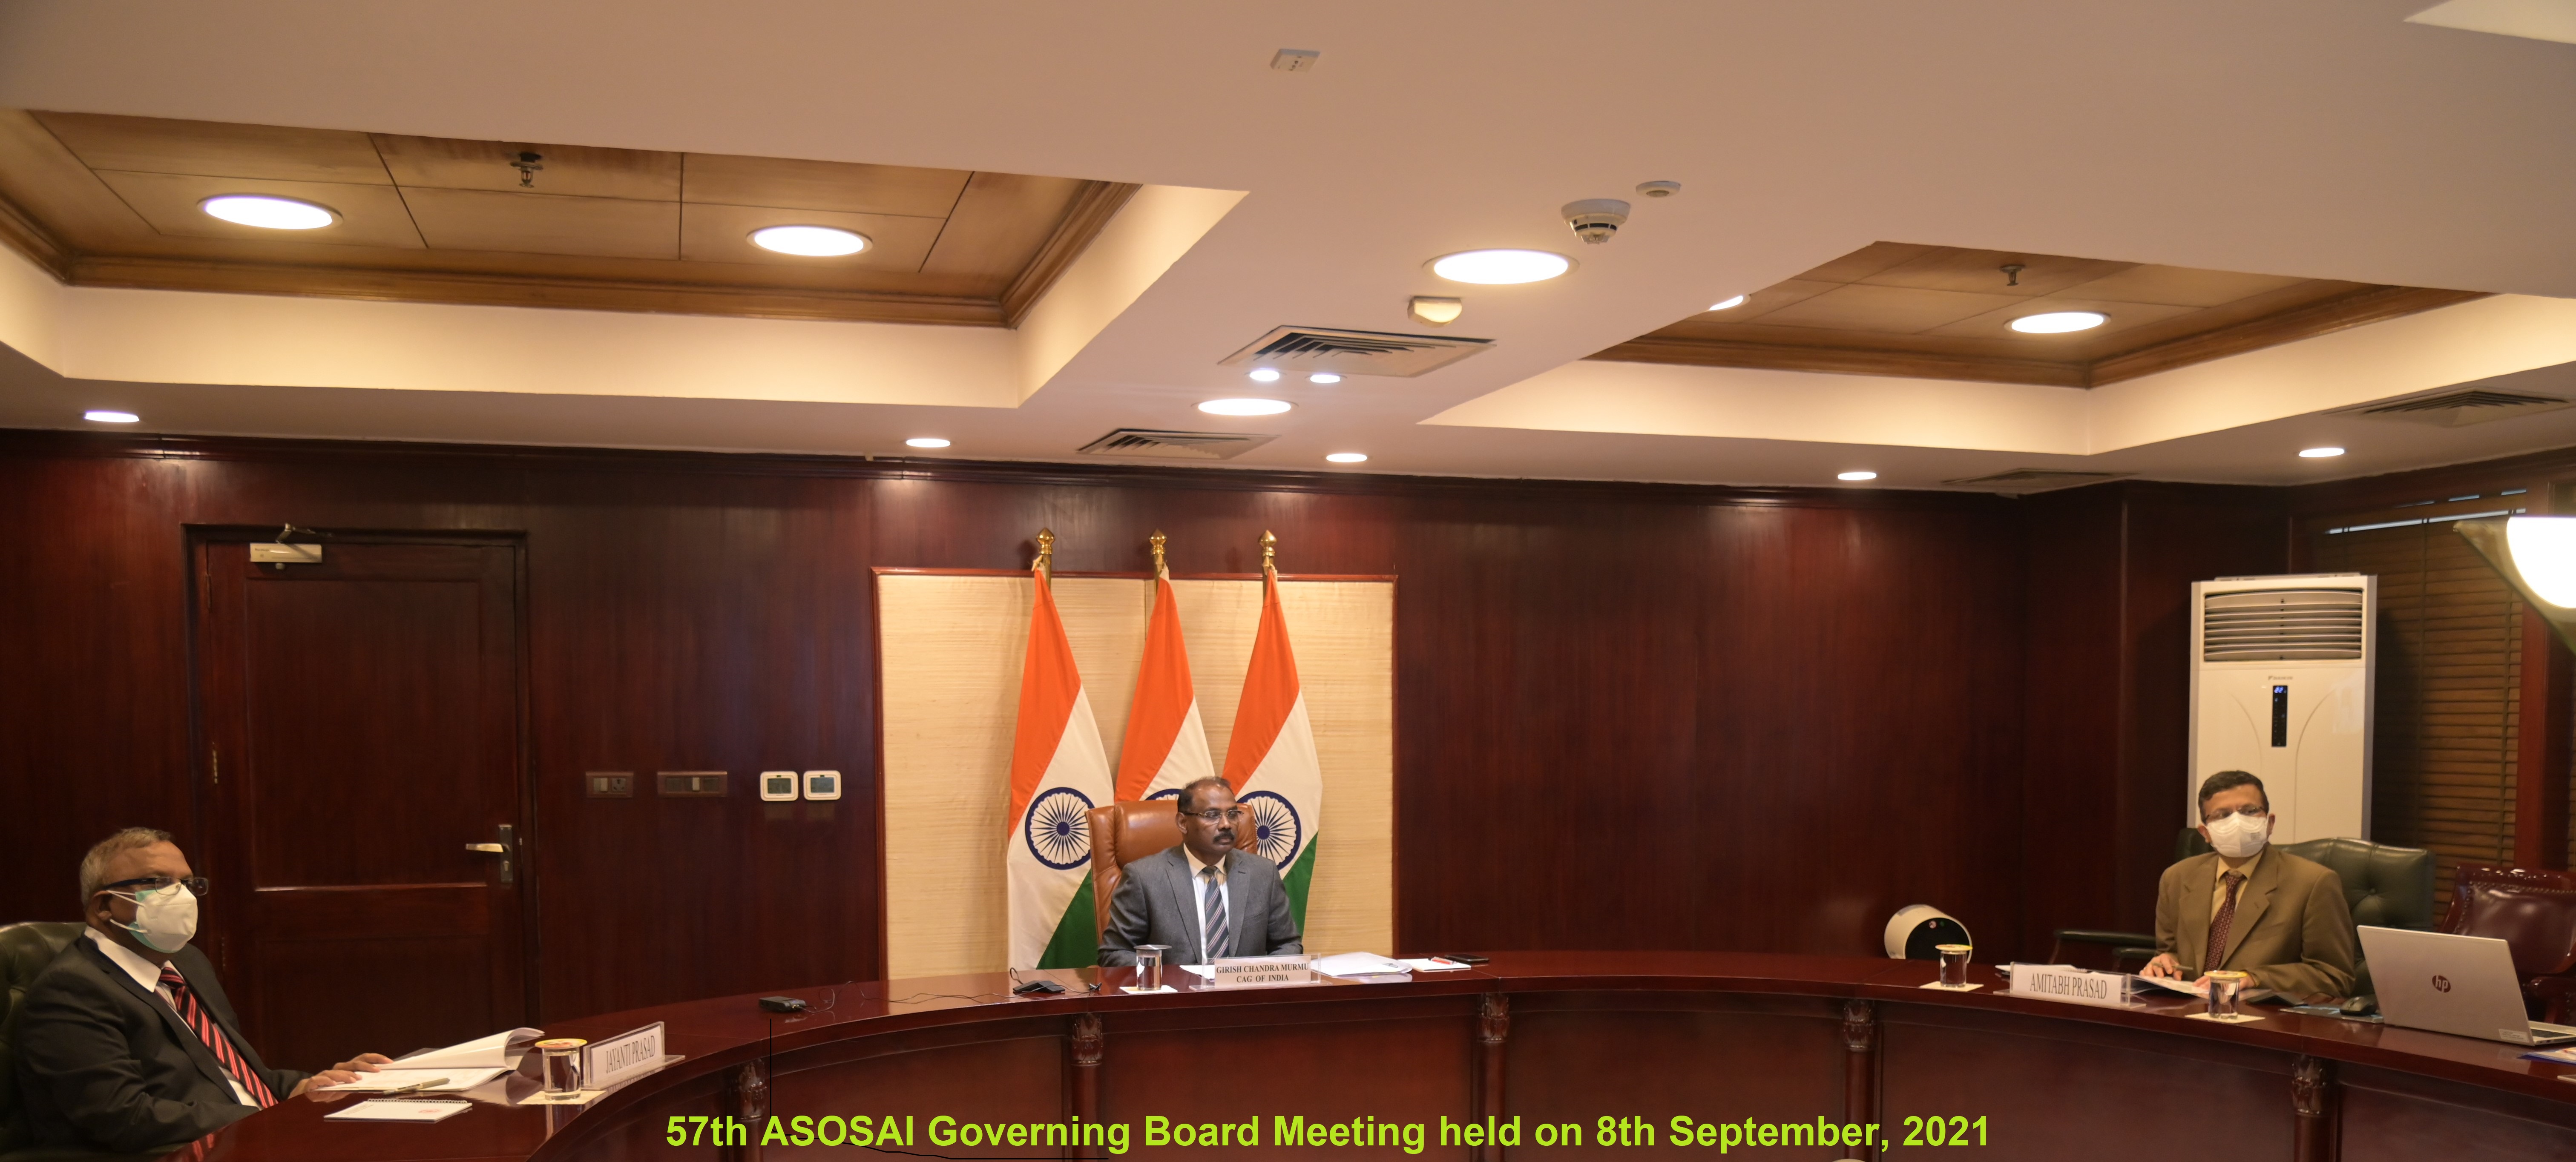 The CAG attending the 57th Governing Board Meeting hosted by SAI Thailand, held virtually on 08.09.2021.